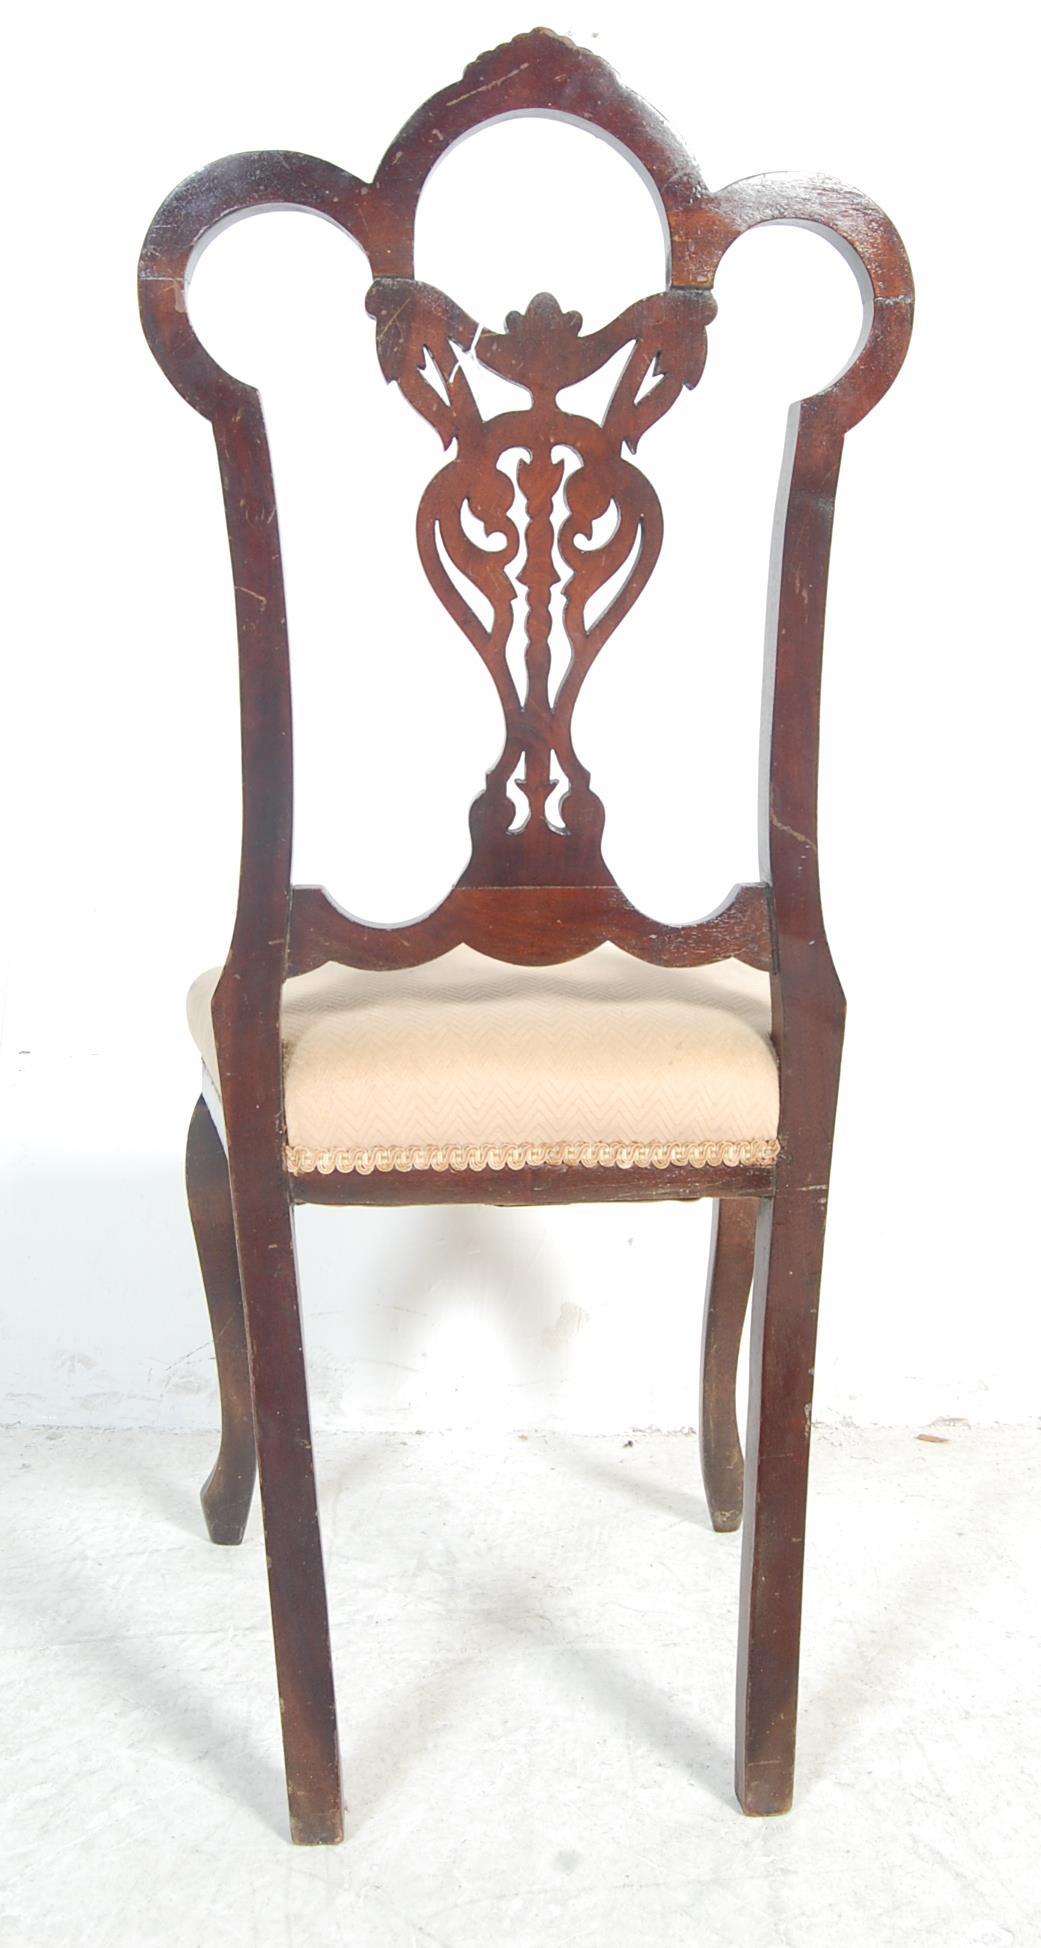 EARLY 20TH CENTURY DINING CHAIR - Image 3 of 6